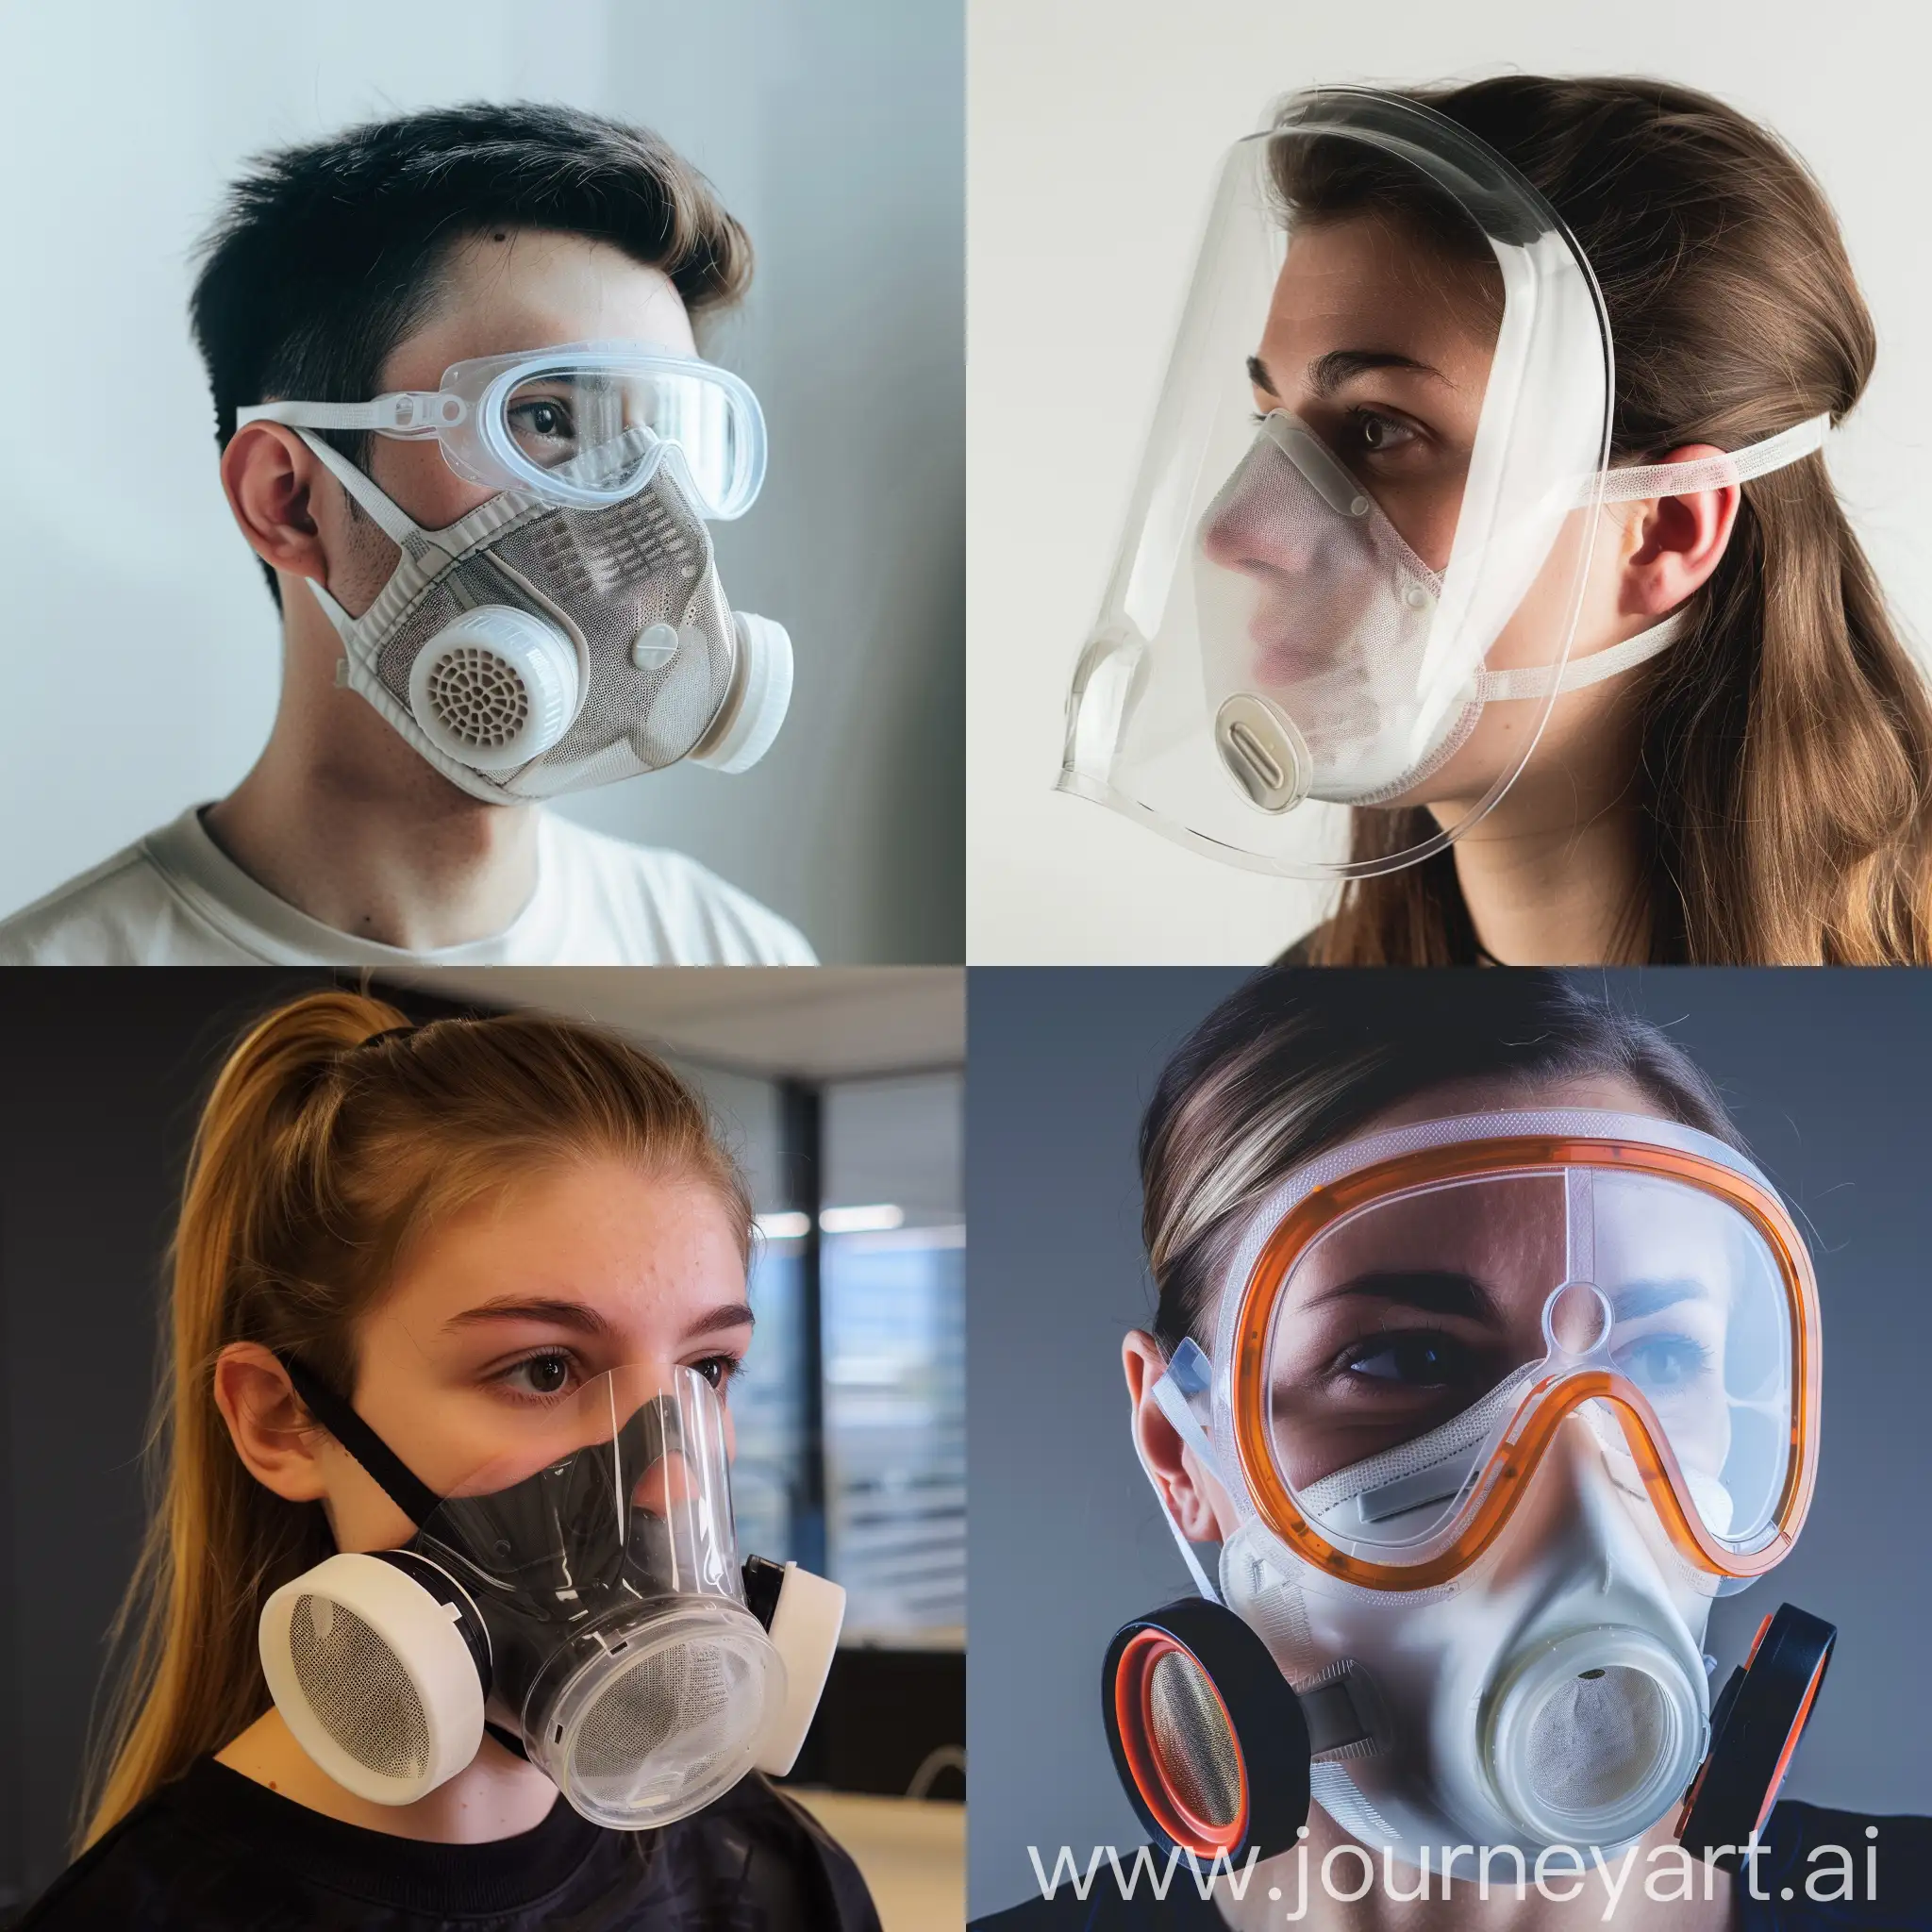 Respiratory-Protective-Mask-with-Transparent-Screen-and-HEPA-Filters